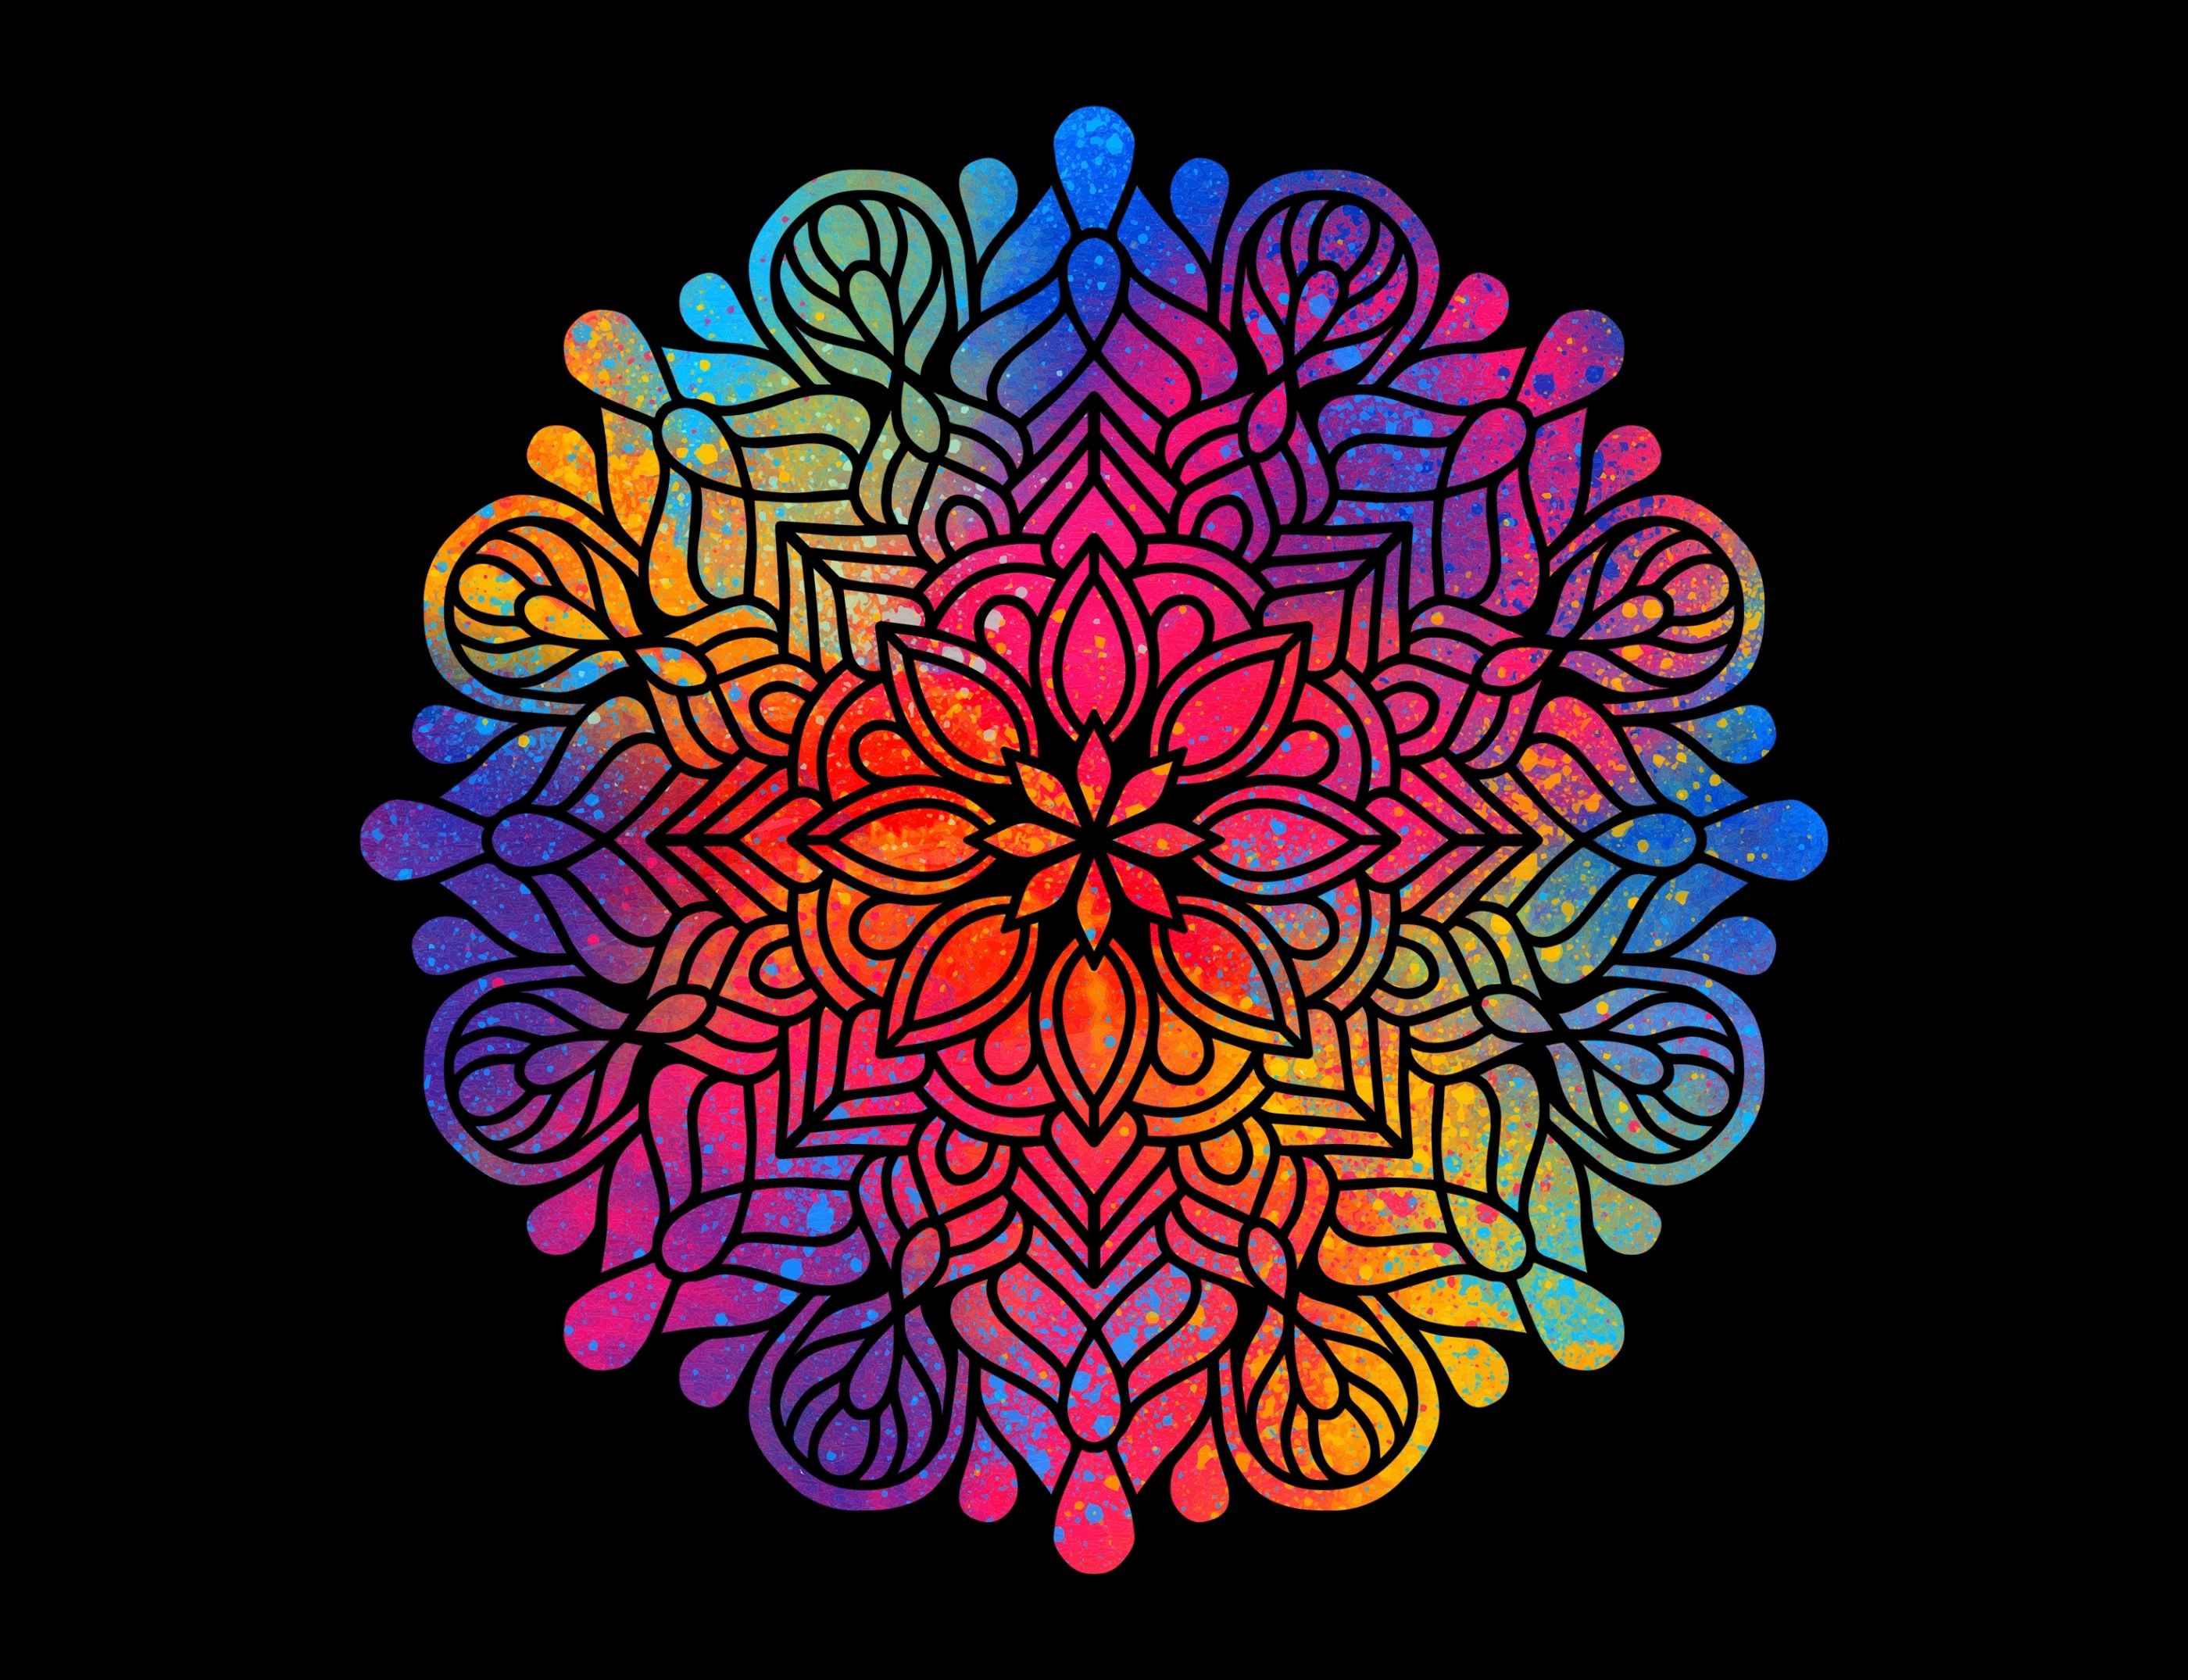 Mandala Color By Number Anti Anxiety Coloring Book For Adult Relaxation  BLACK BACKGROUND: Coloring Book For Adults With Beautiful Mandala For  Stress Relief And Relaxation by Diana Ross